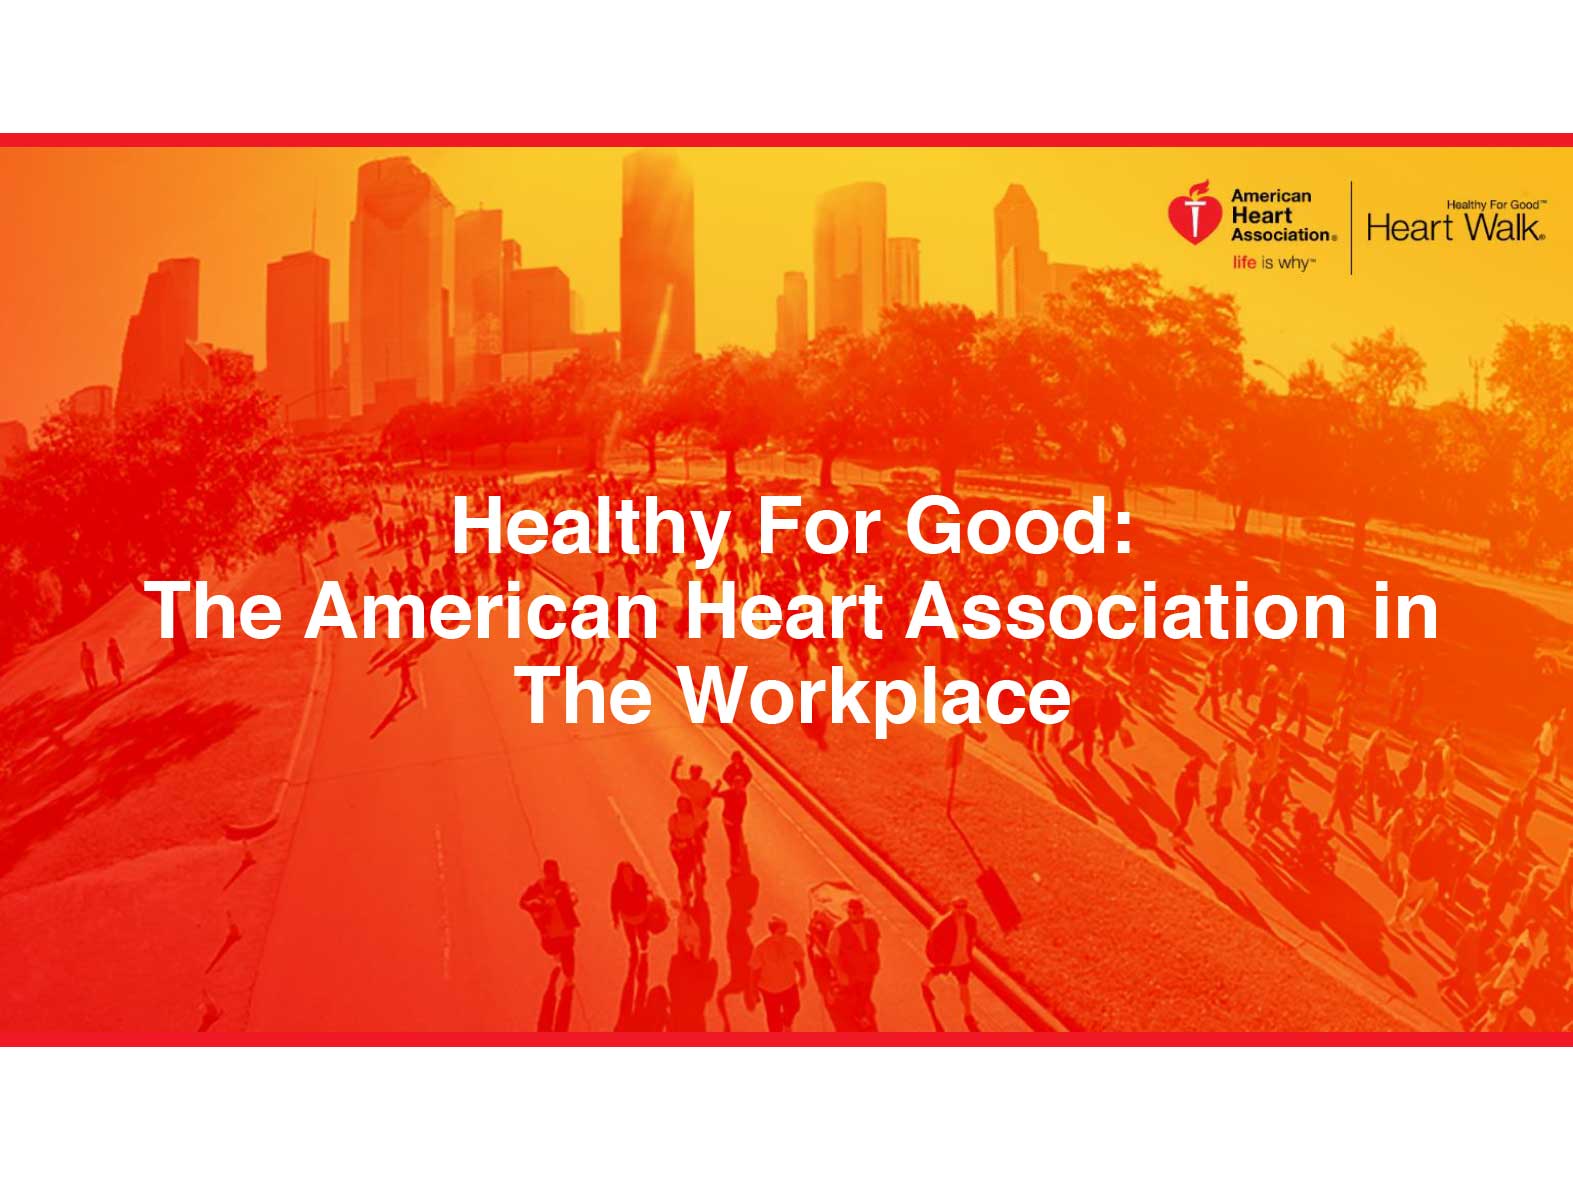 Healthy For Good: The American Heart Association in The Workplace